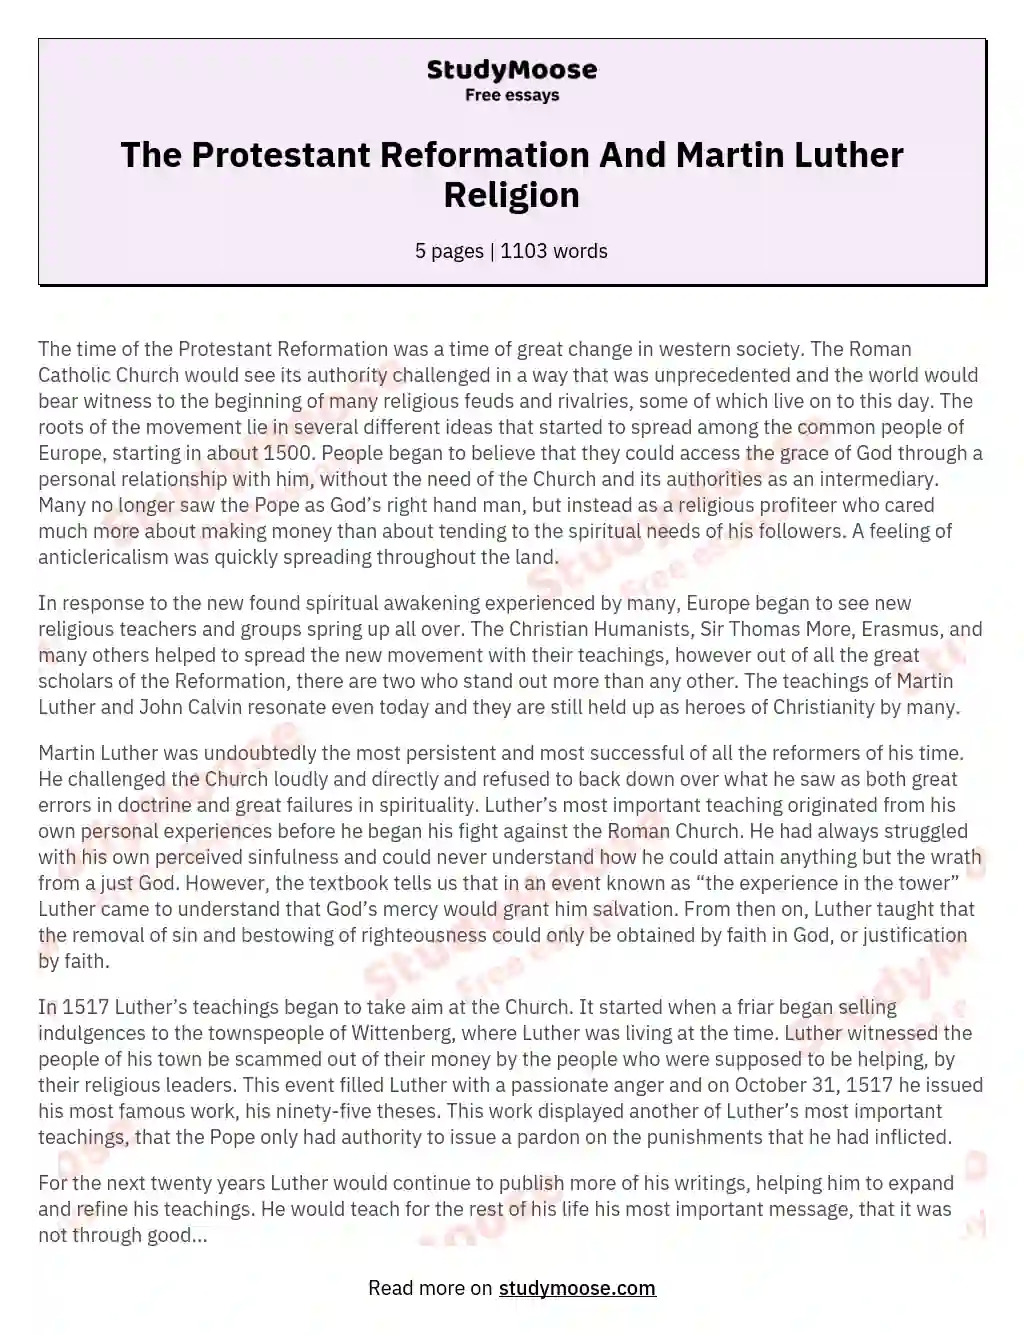 The Protestant Reformation And Martin Luther Religion essay